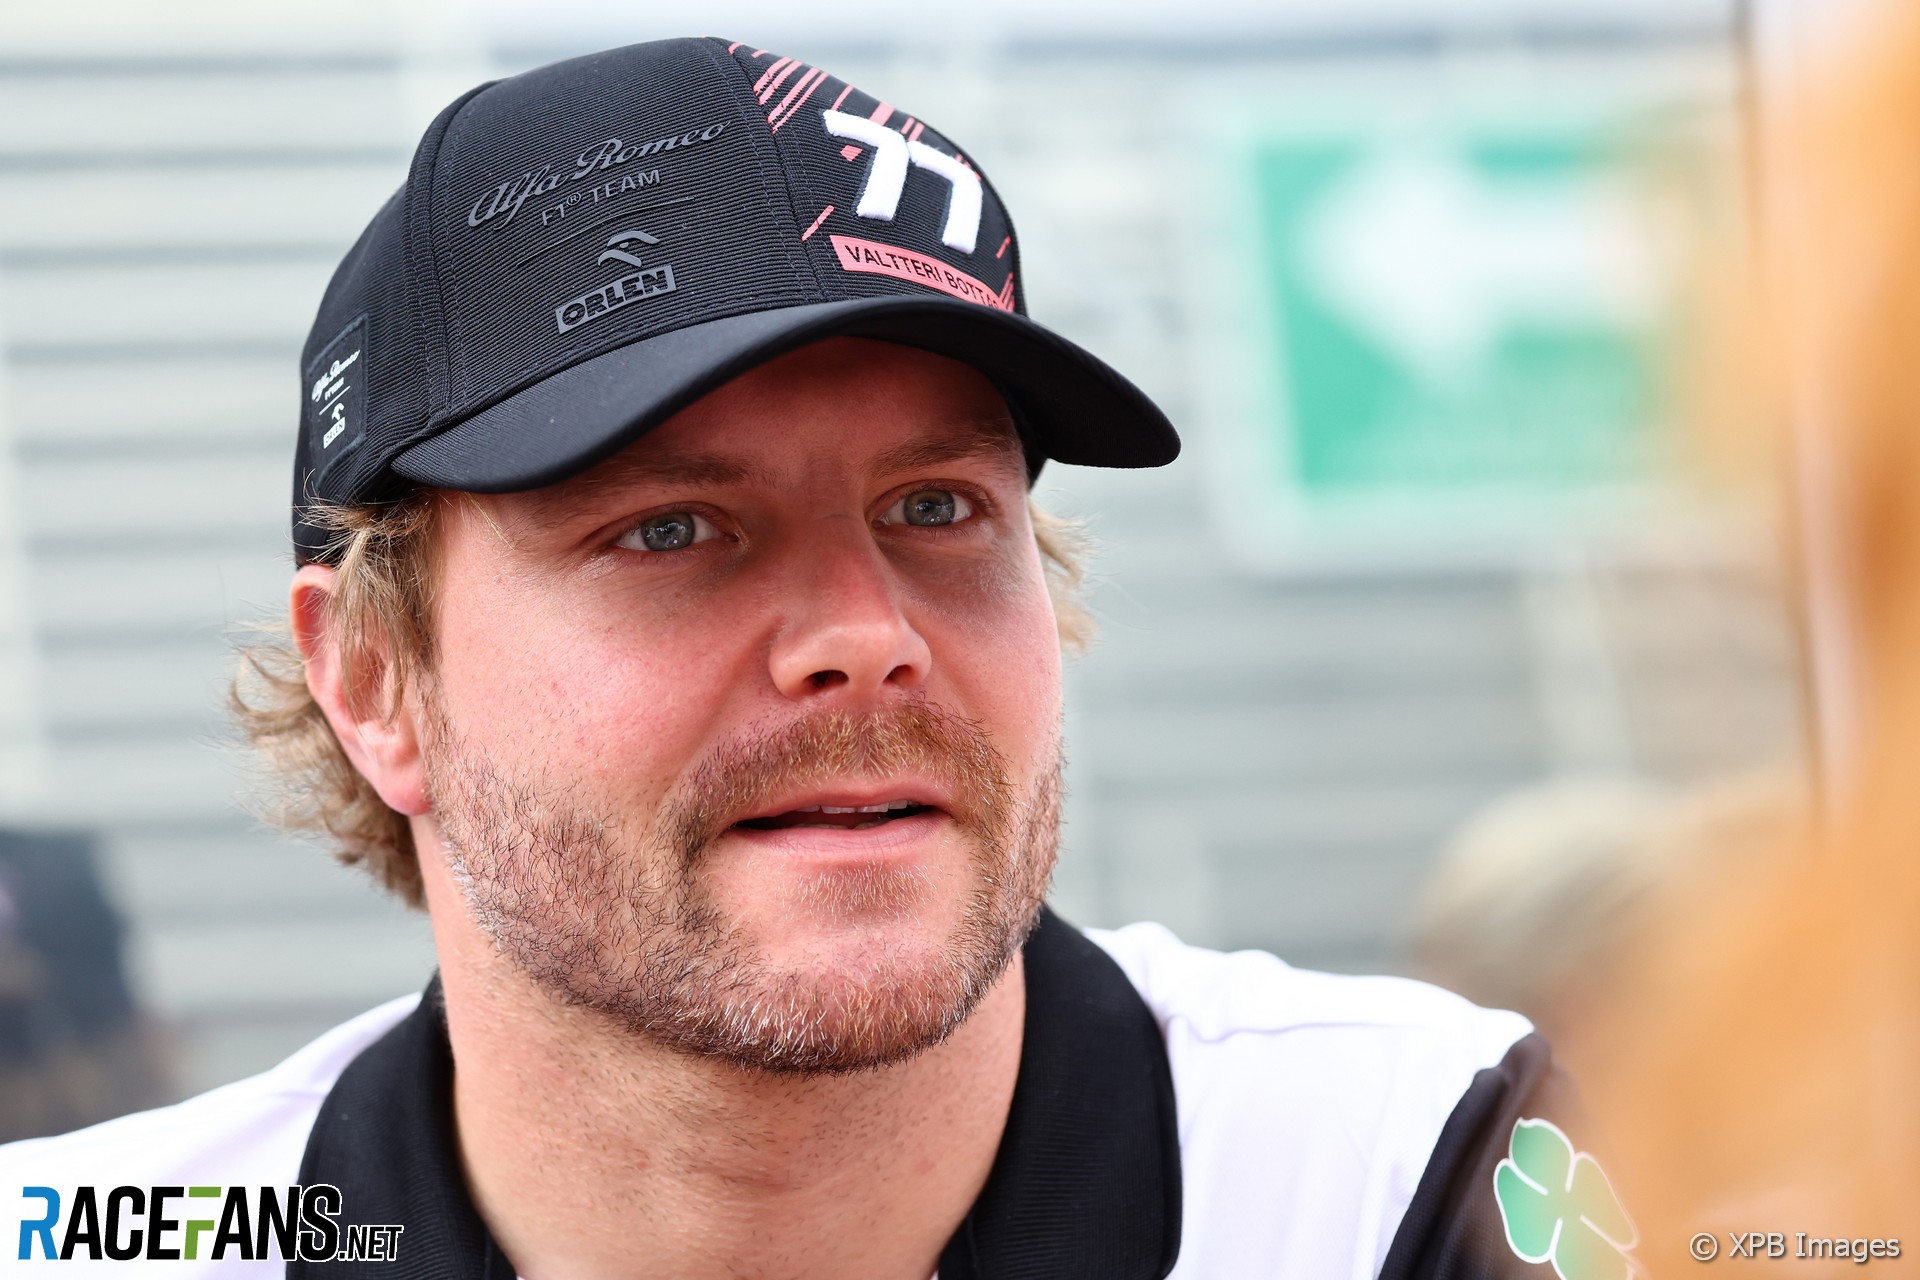 FIA’s ban on drivers’ political statement shows “they want to control us” – Bottas | 2023 F1 season